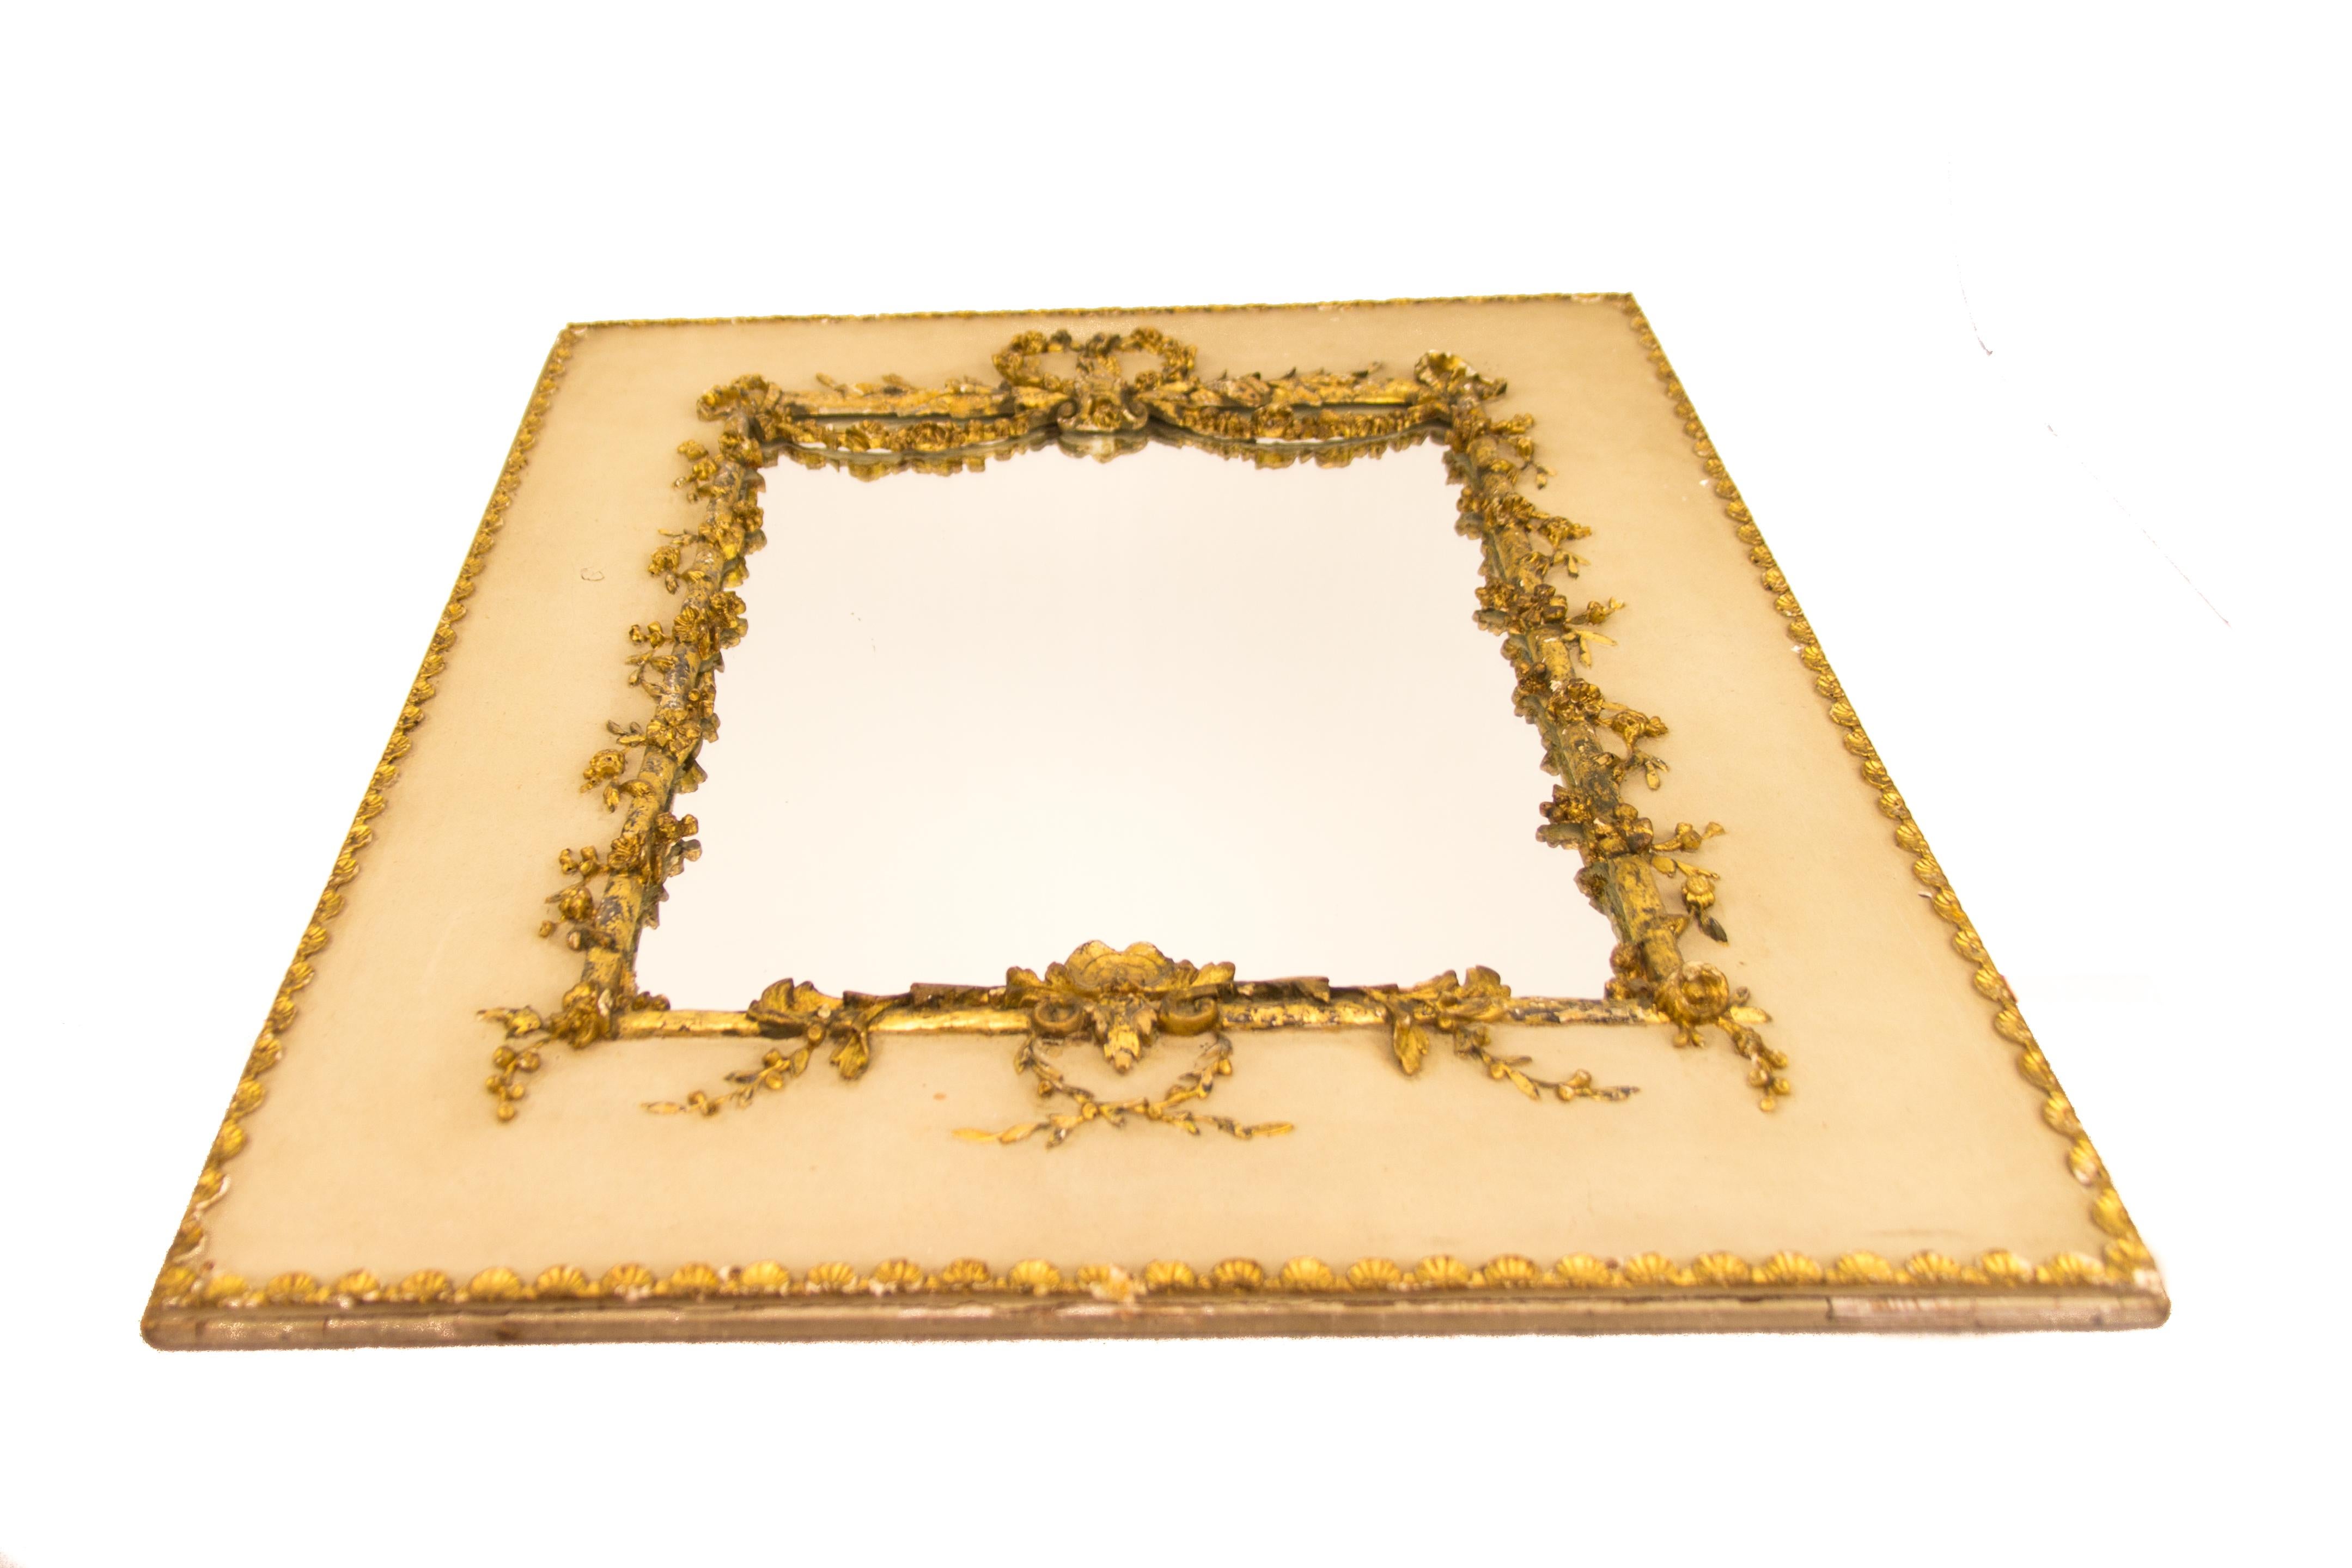 This exquisite antique trumeau Rococo or Louis XV style picture or mirror frame on white painted wooden panel is decorated with golden garlands of flowers and leaves, perimeter decorated with small golden shell ornaments. The frame has a newly